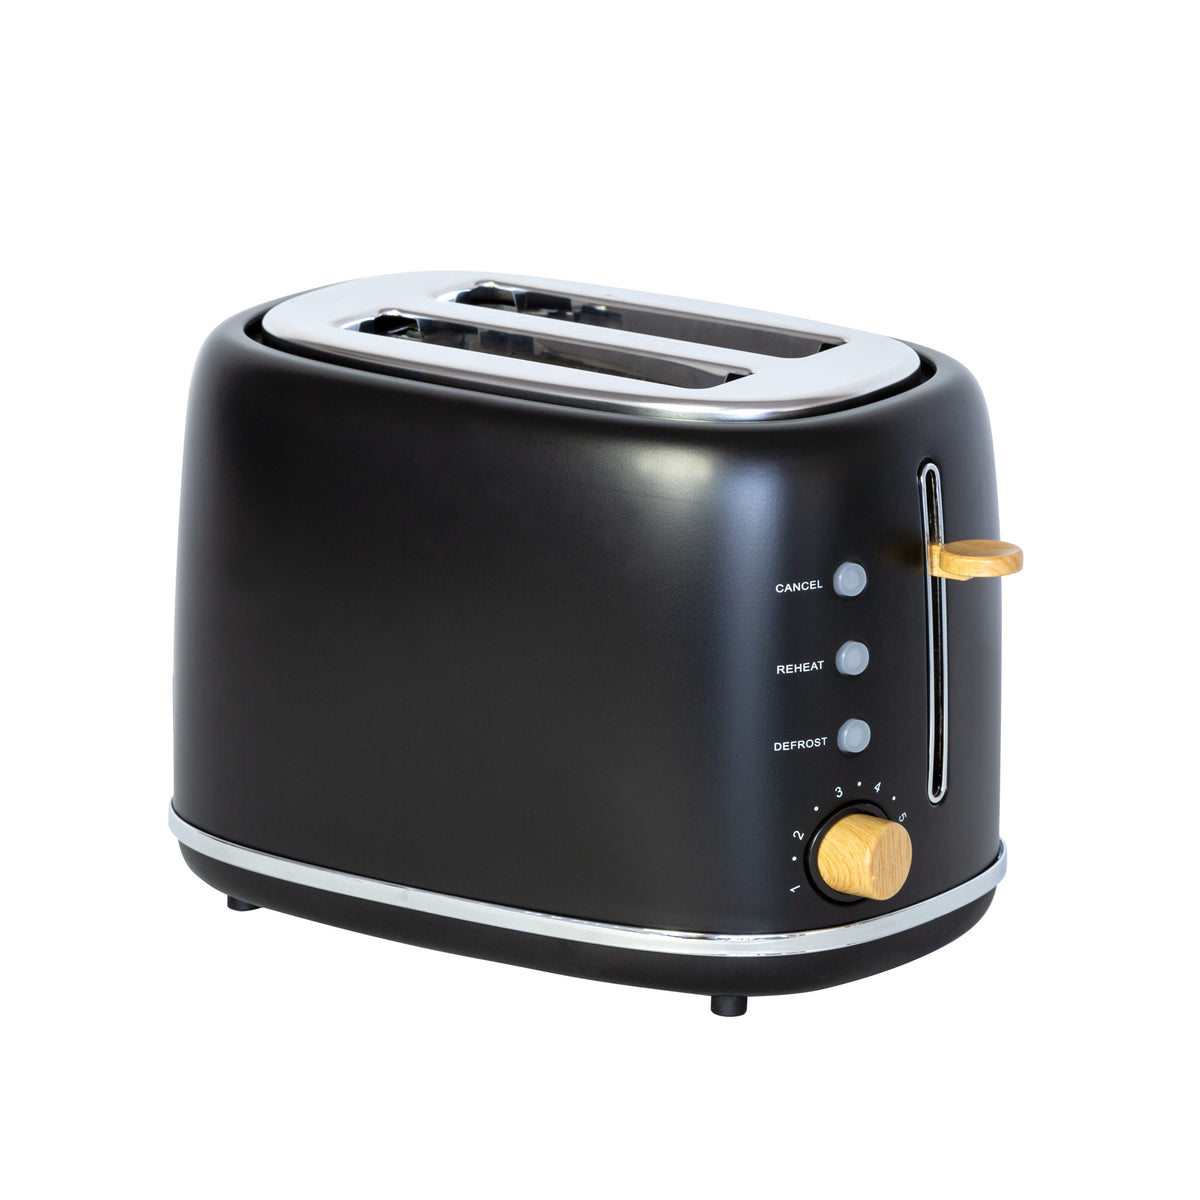 2-Slice Bread Toaster in Black with Wood Accents on white background